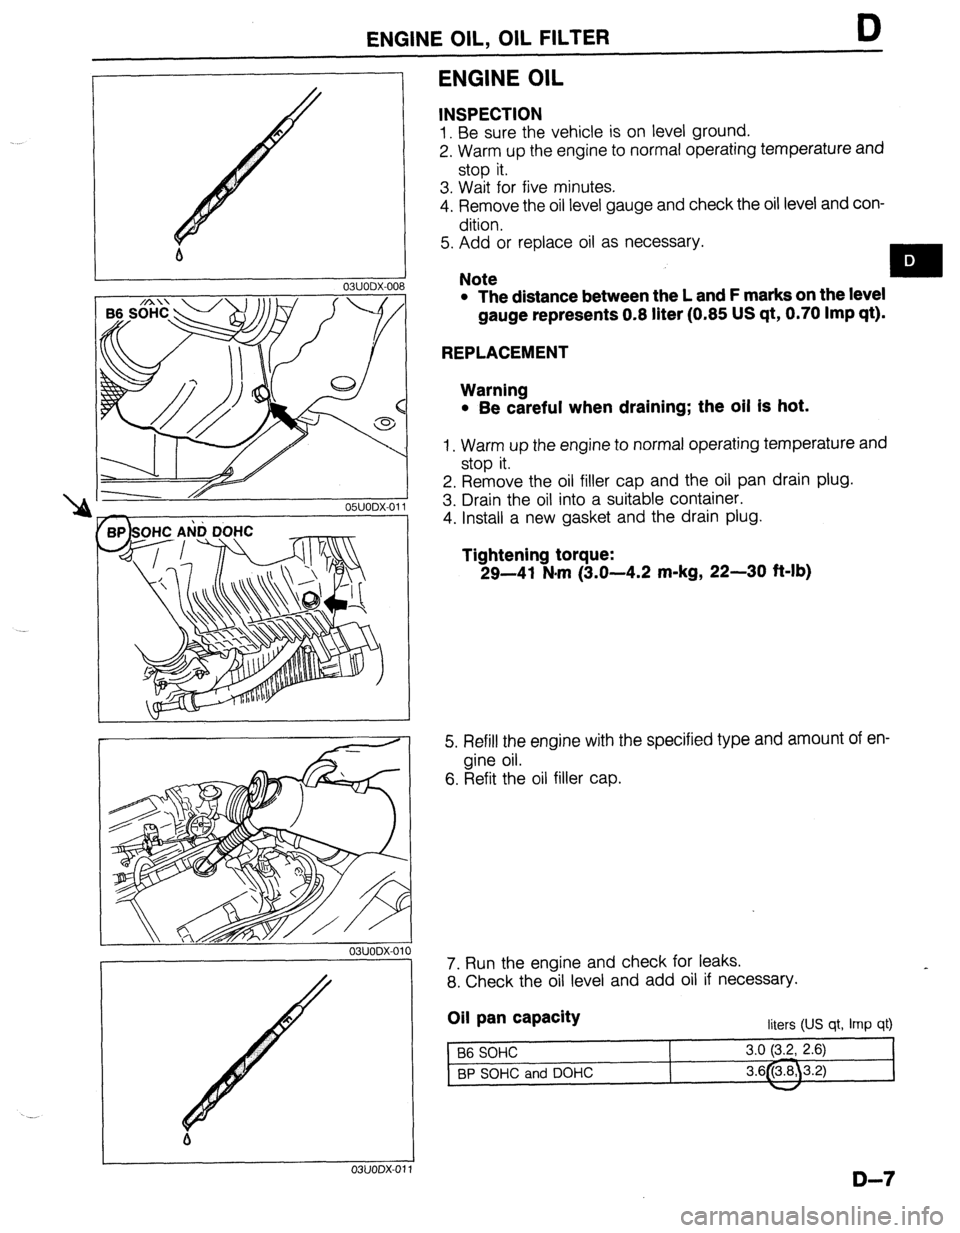 MAZDA 323 1989  Factory Repair Manual ENGINE OIL, OIL FILTER D 
b 
I 
03UODX-00 
ONODX-01 
r 
03UODX-011 
ENGINE OIL 
INSPECTION 
1. Be sure the vehicle is on level ground. 
2. Warm up the engine to normal operating temperature and 
stop 